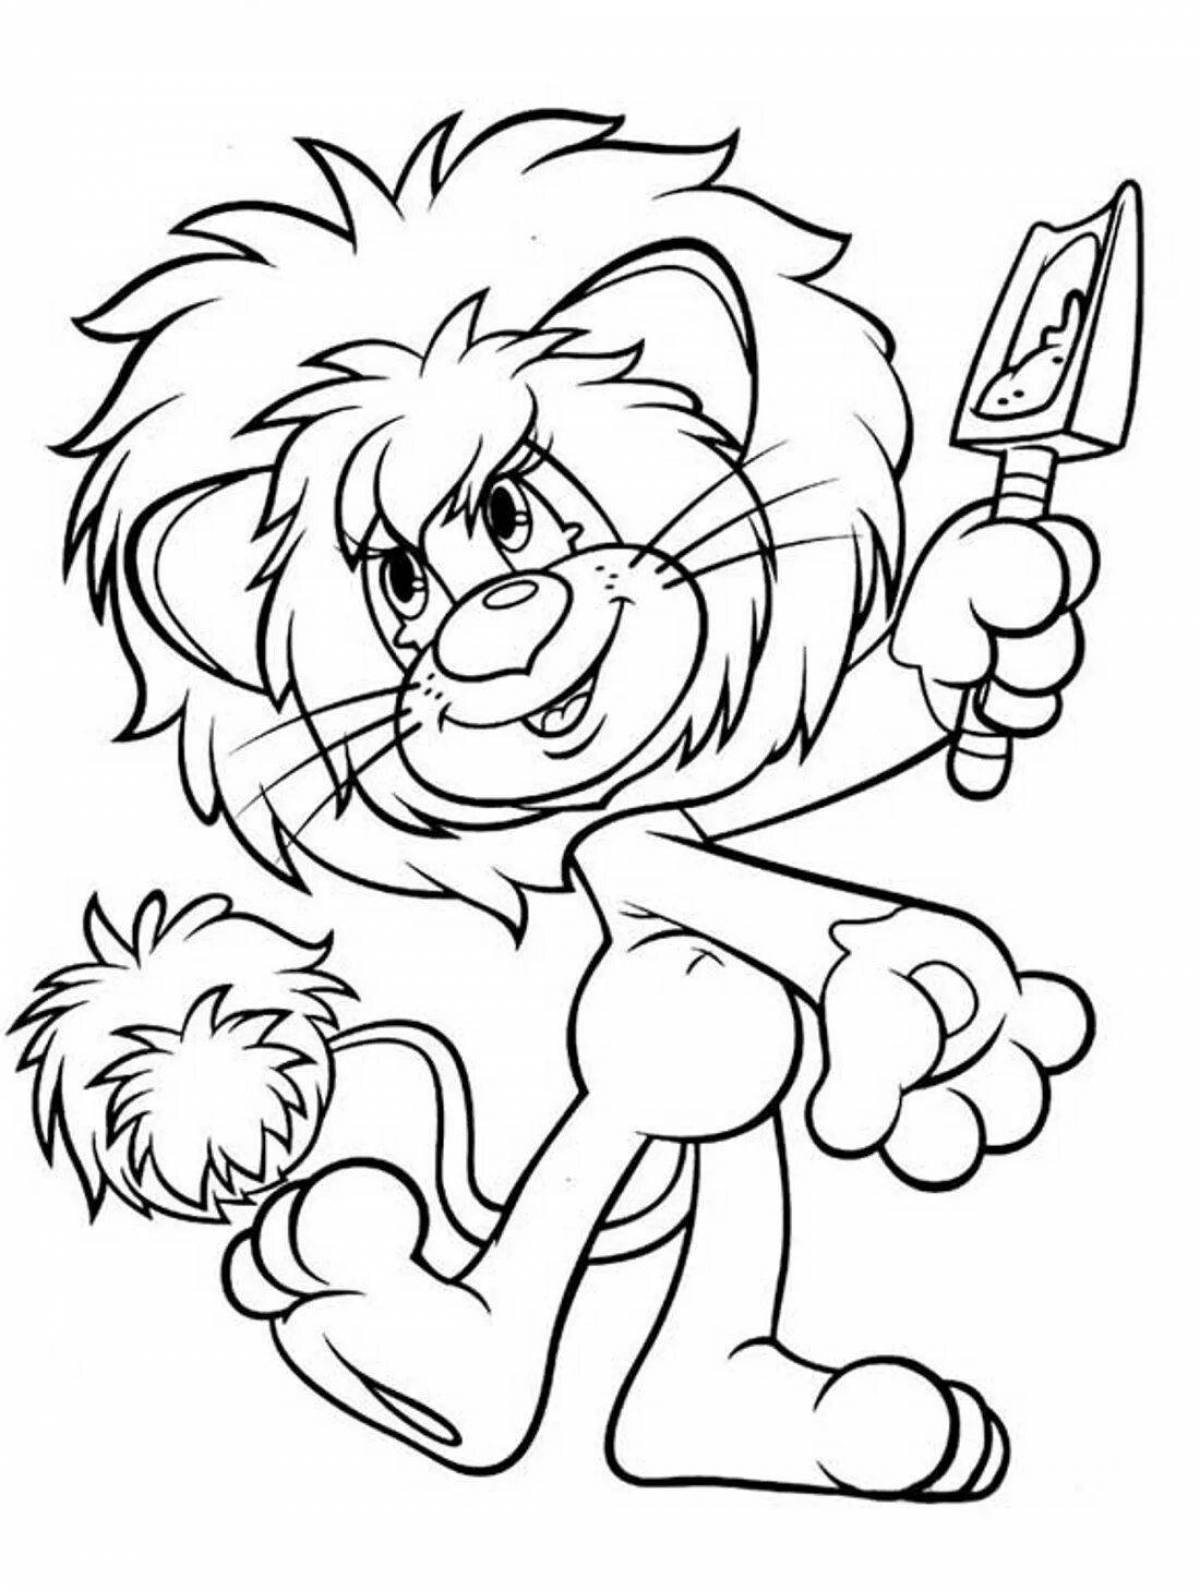 Color-frenzy crumbs antoshka coloring page